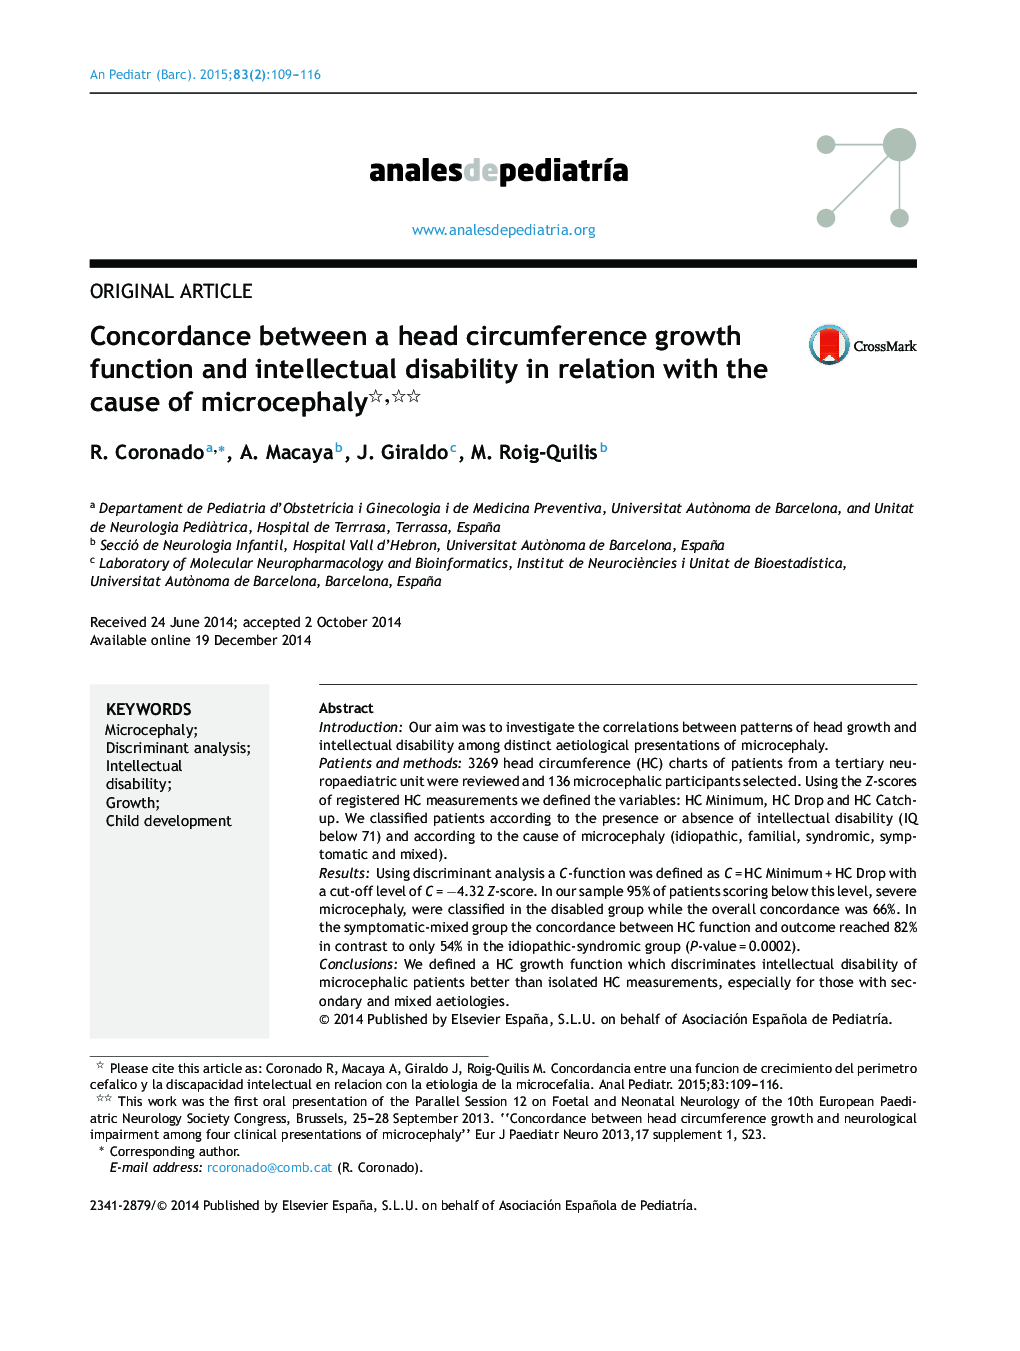 Concordance between a head circumference growth function and intellectual disability in relation with the cause of microcephaly 